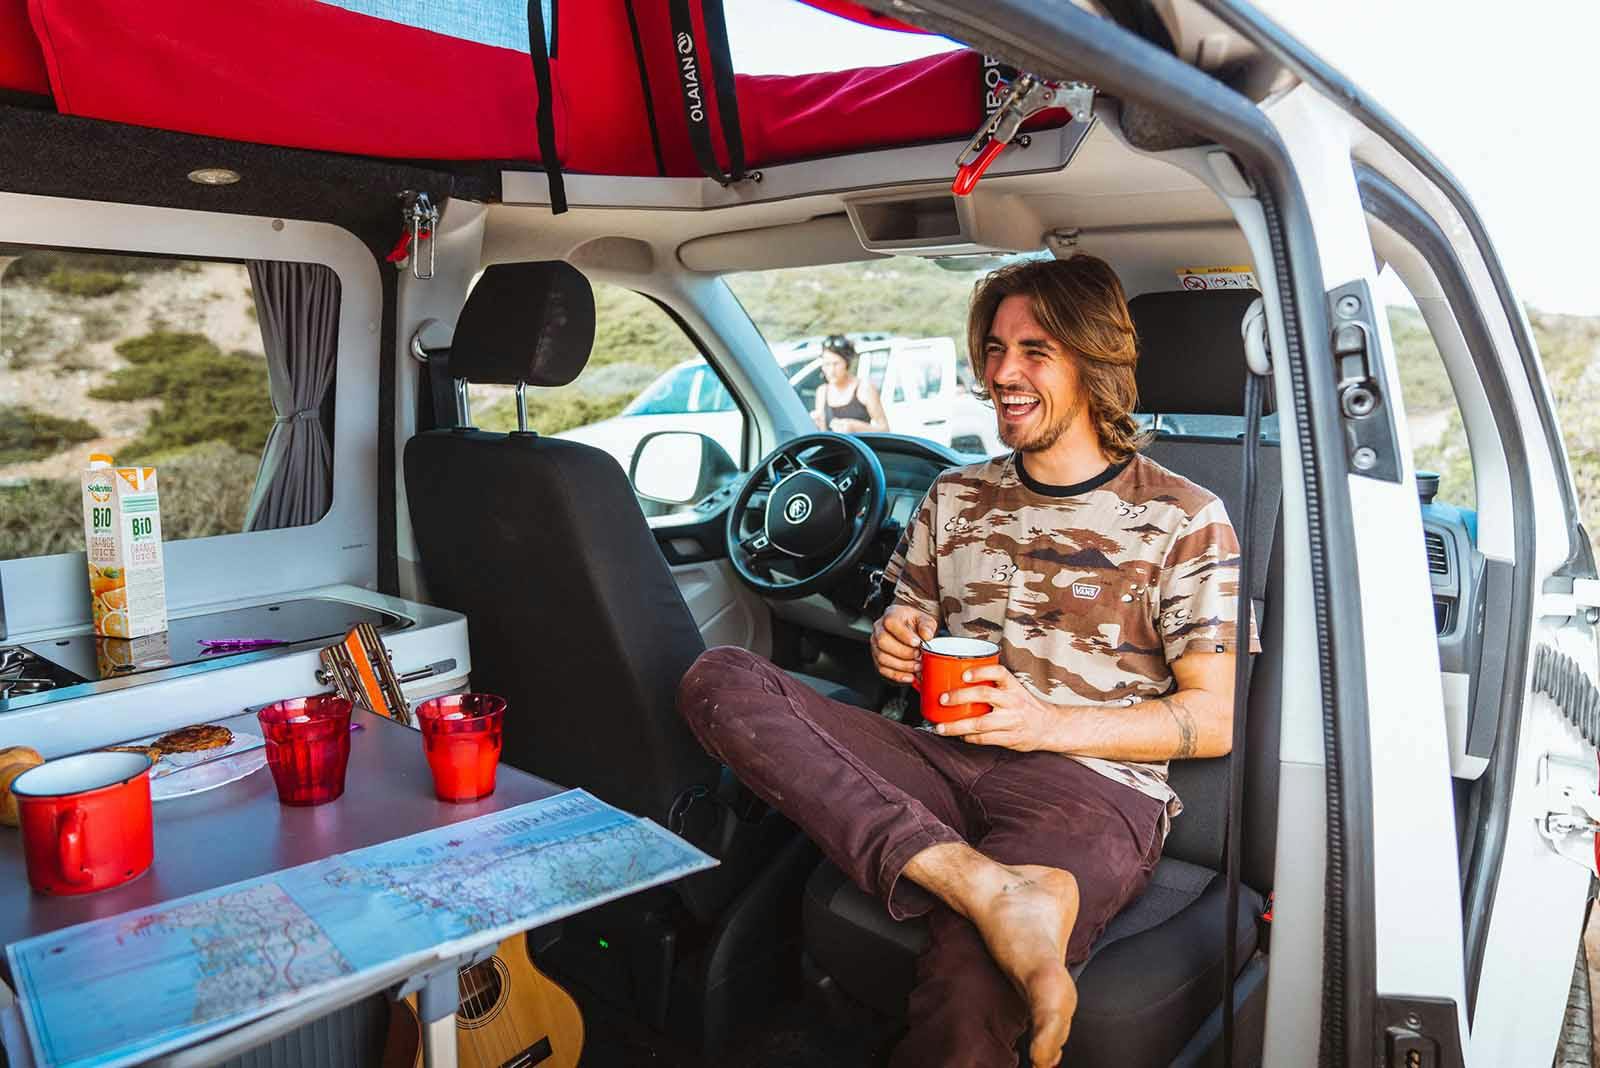 Surfer relaxing in the Siesta Beach campervan after a day of learning to surf in Portugal.